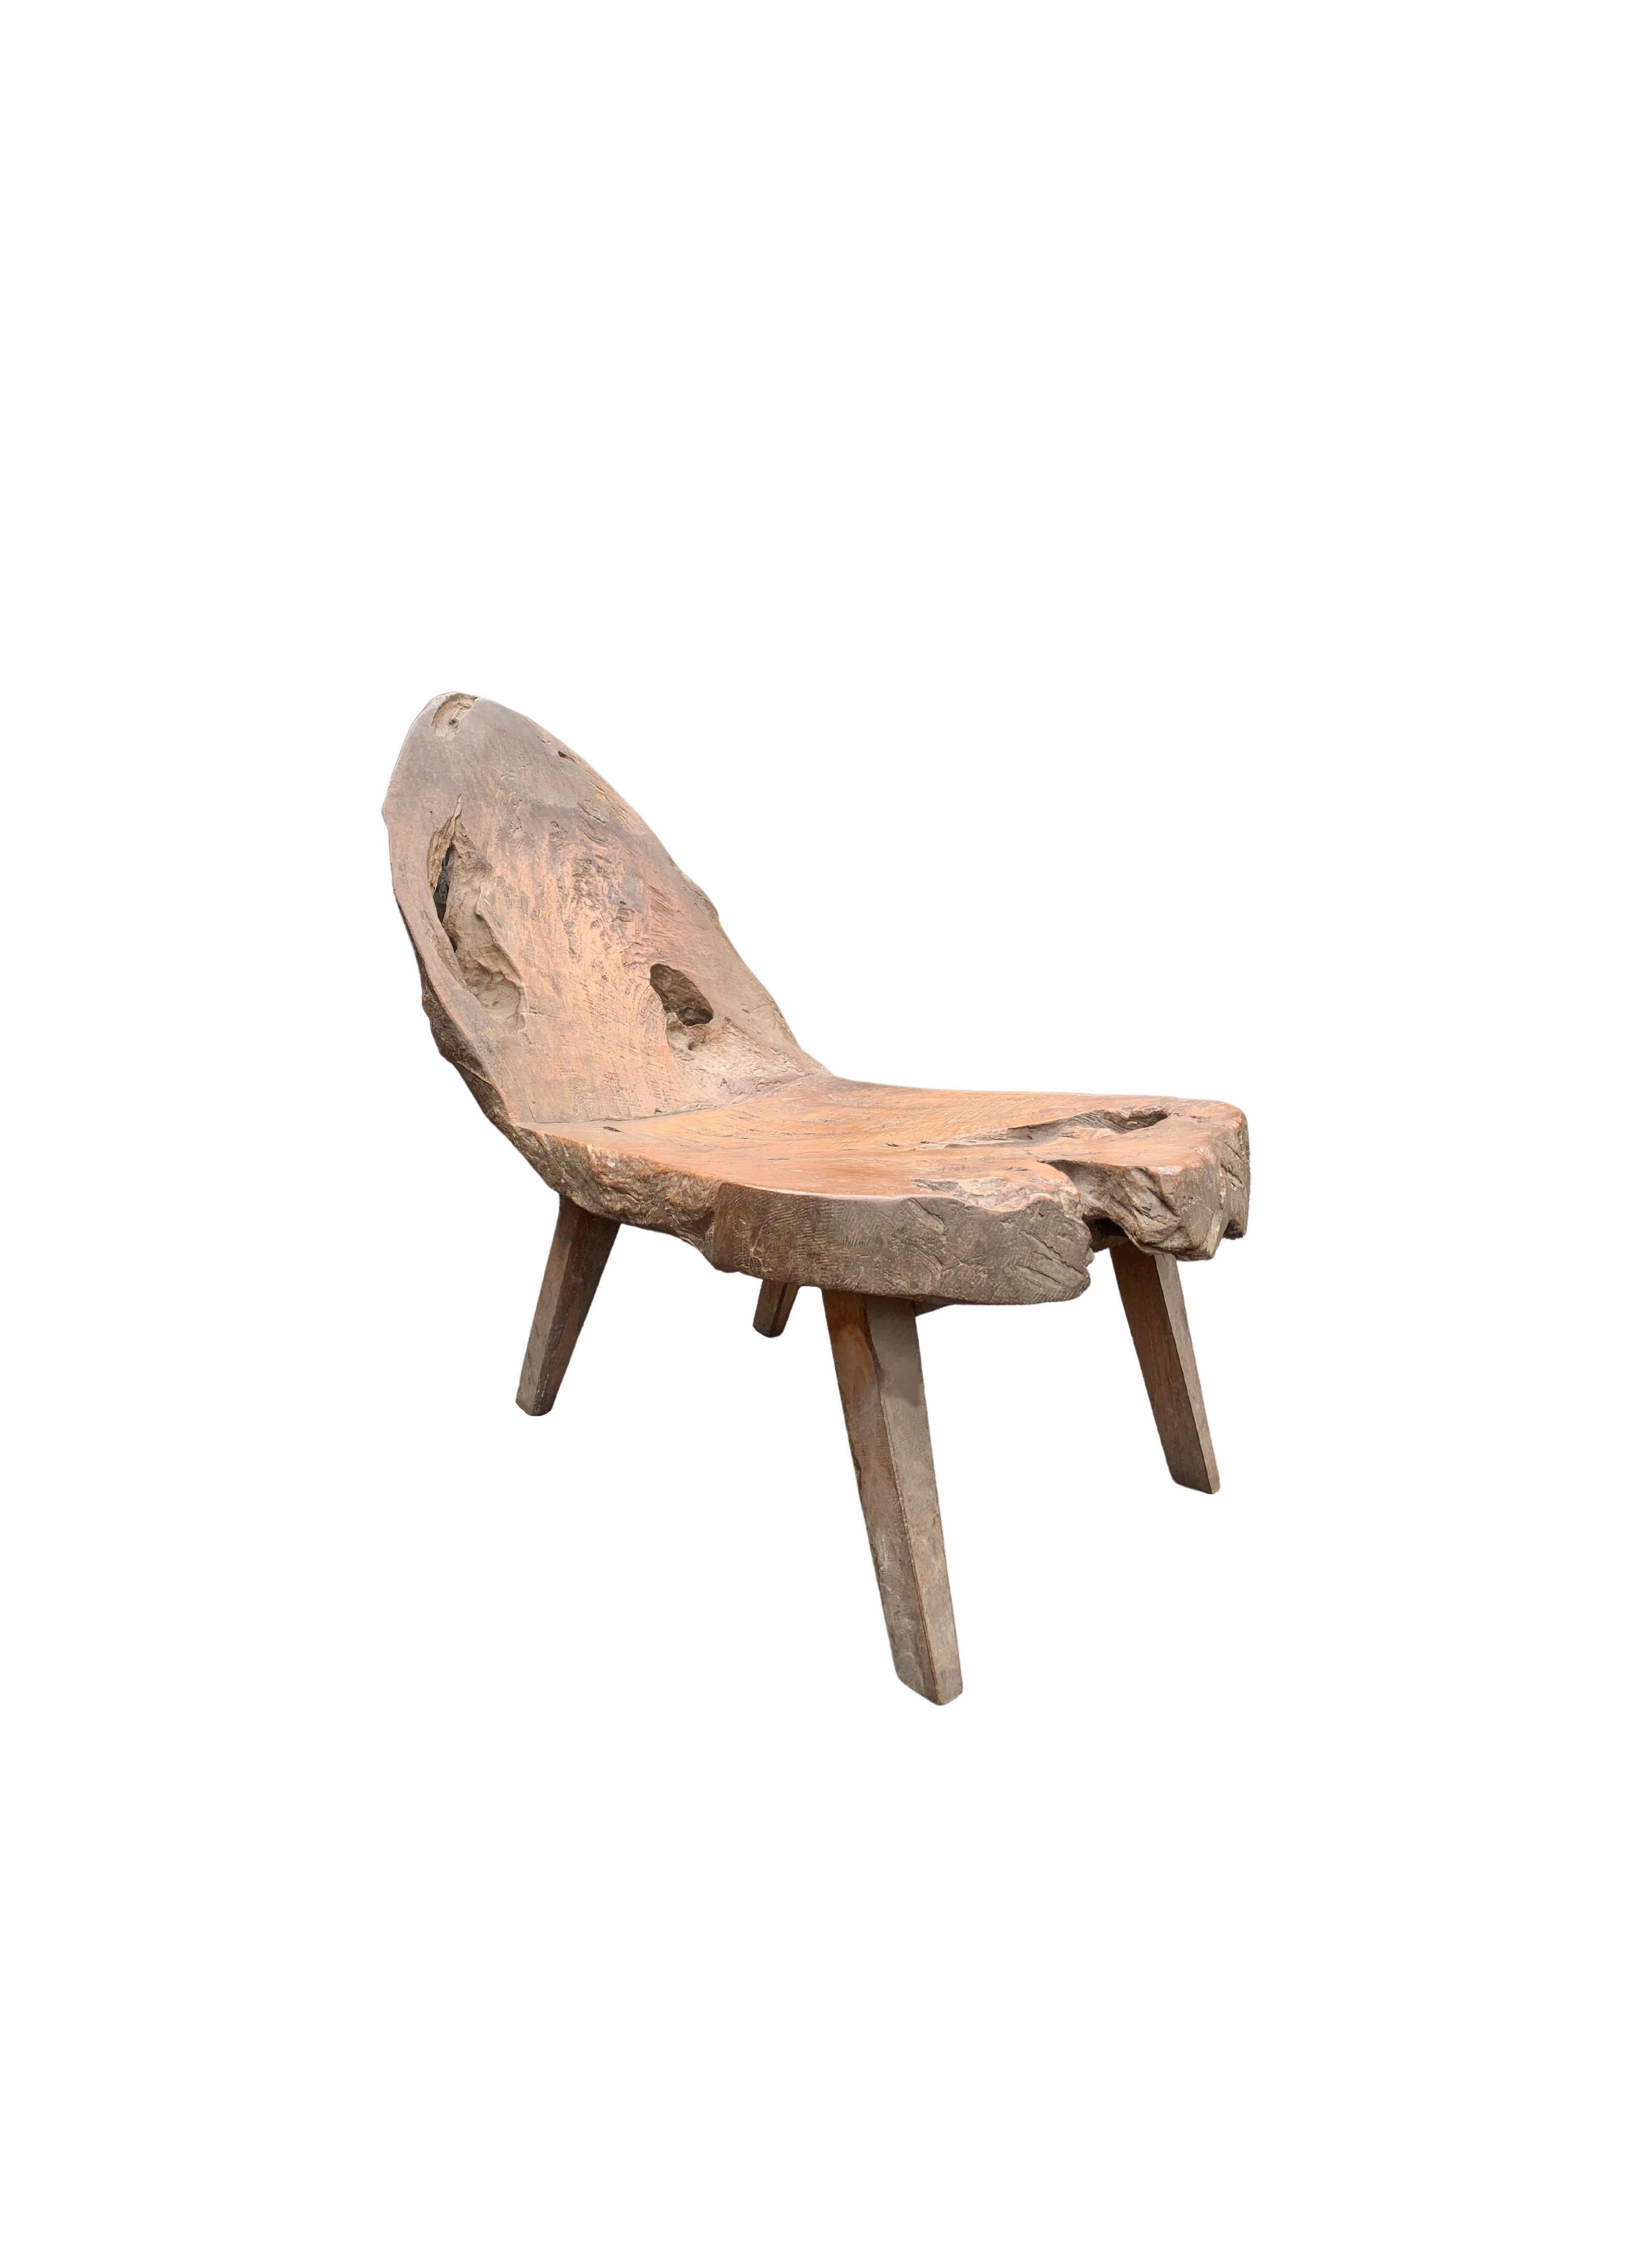 This hand-carved teak wood chair originates from the Island of Madura, off the coast of Northeastern Java. It features a wonderful organic shape with angular legs. The mix of textures, shapes and holes add to its charm. The seat and backrest was